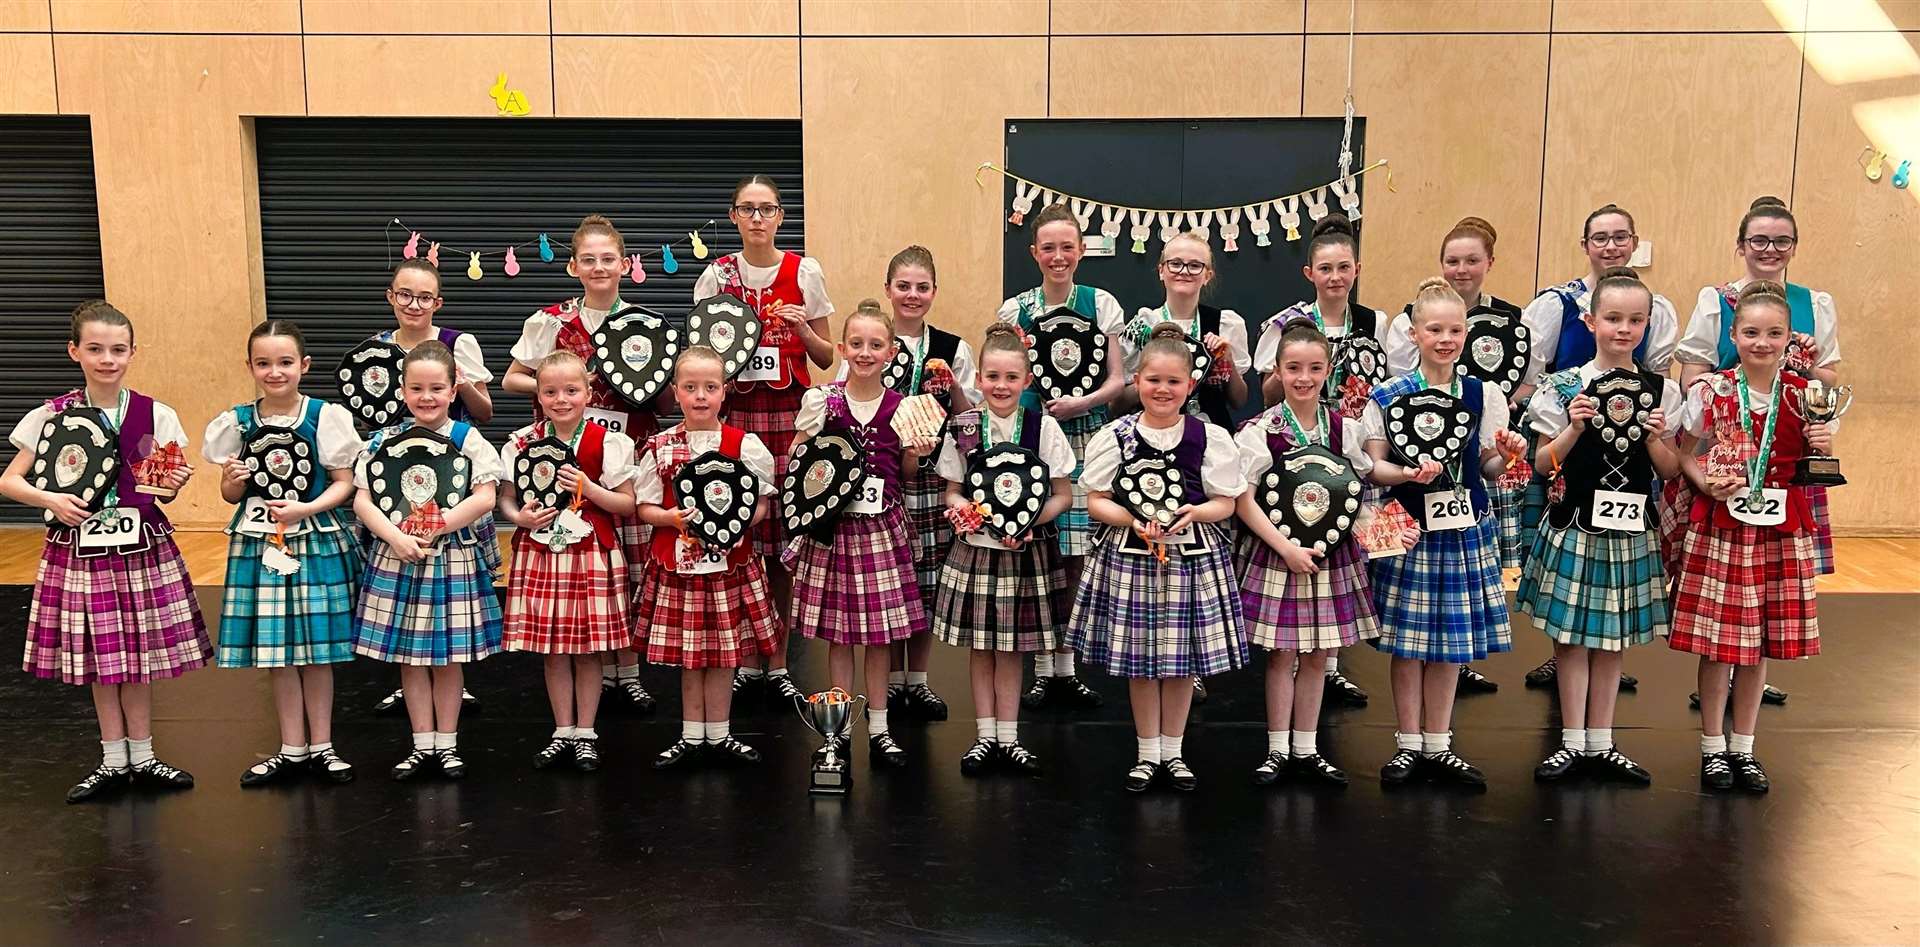 The morning winners at the dancing competition in Wick.